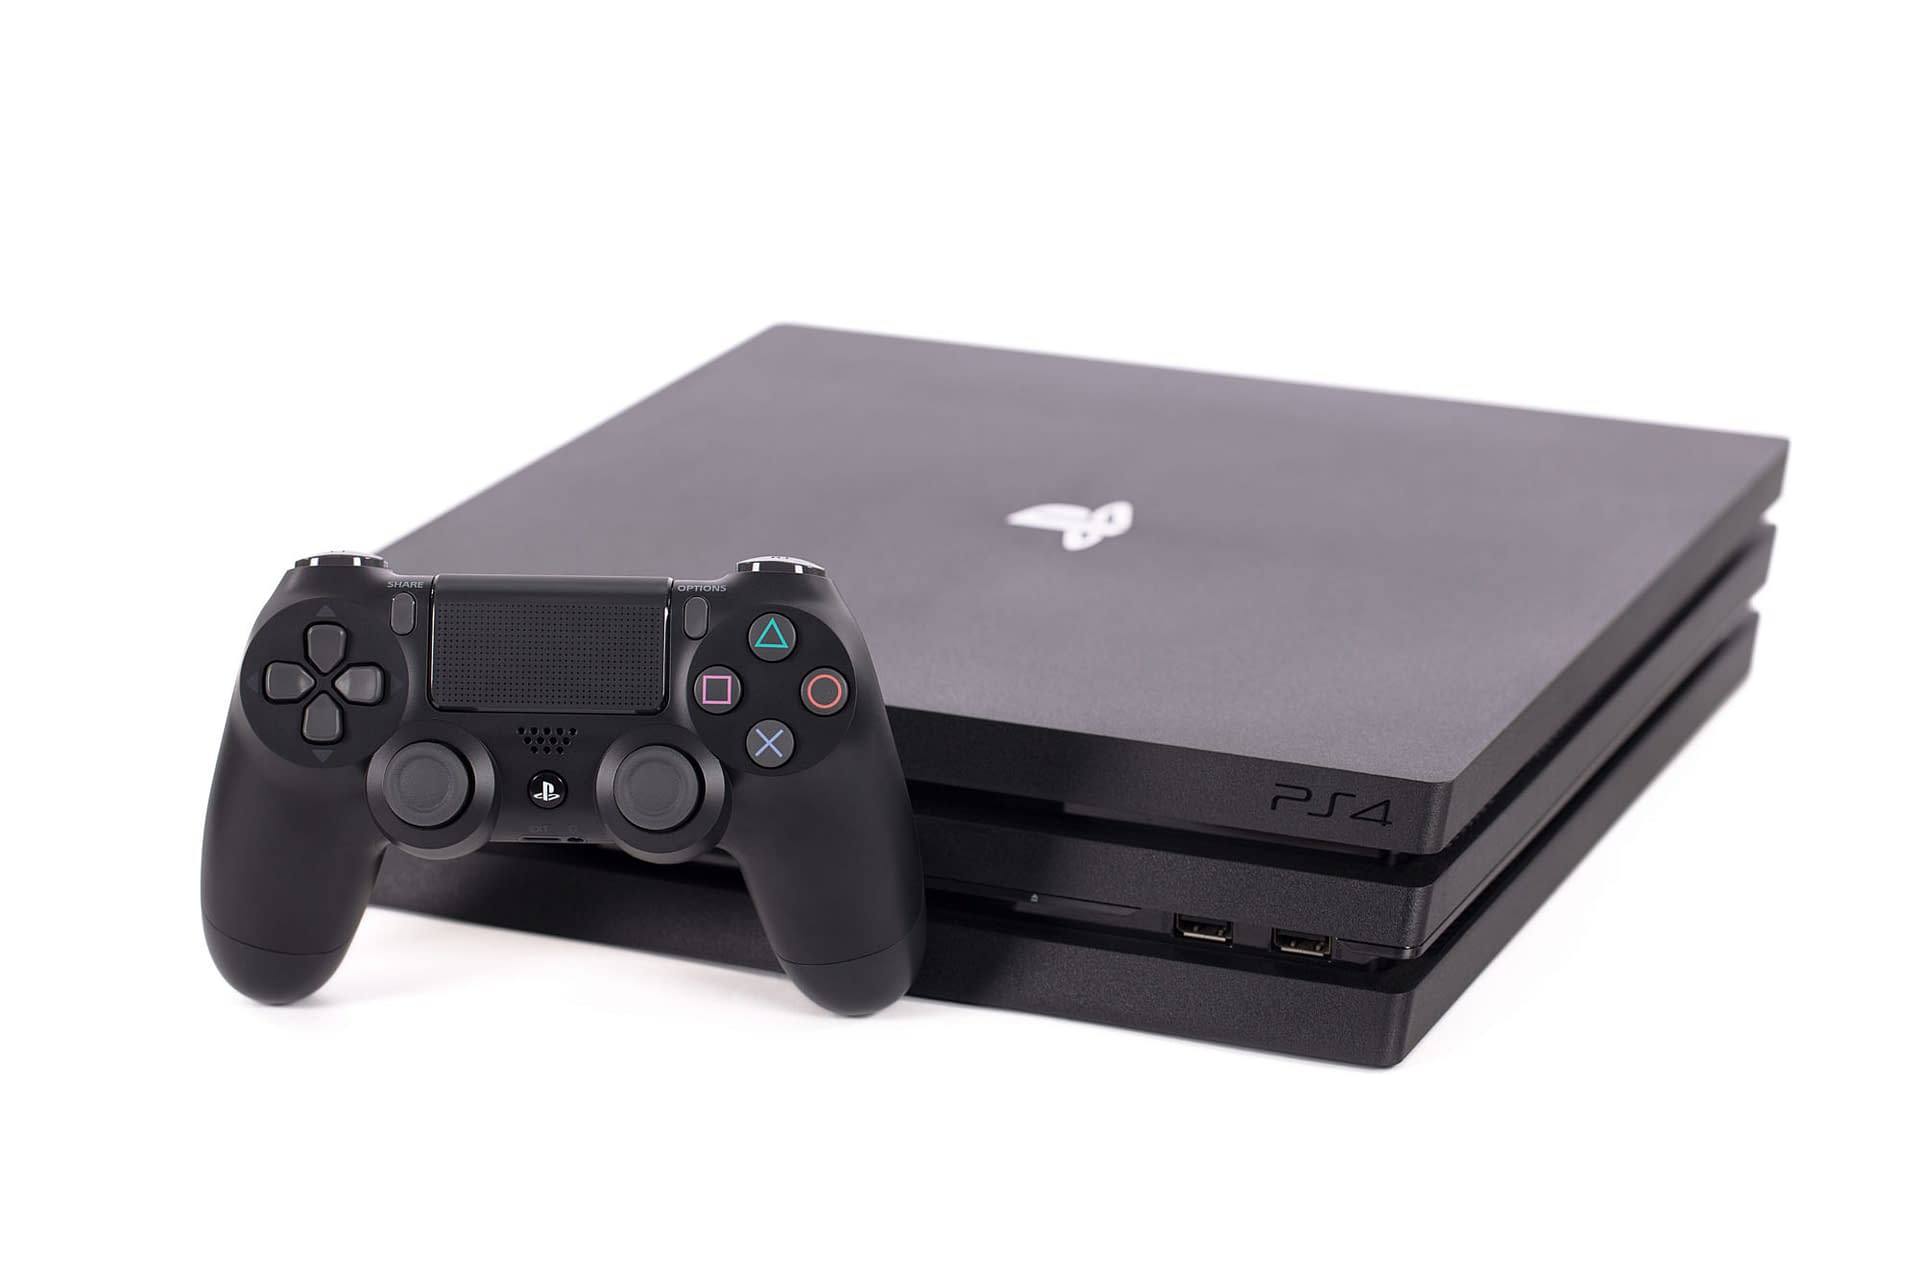 lobby Middellandse Zee Permanent Sony Responds To PS5 Shortage With... More PS4 Consoles